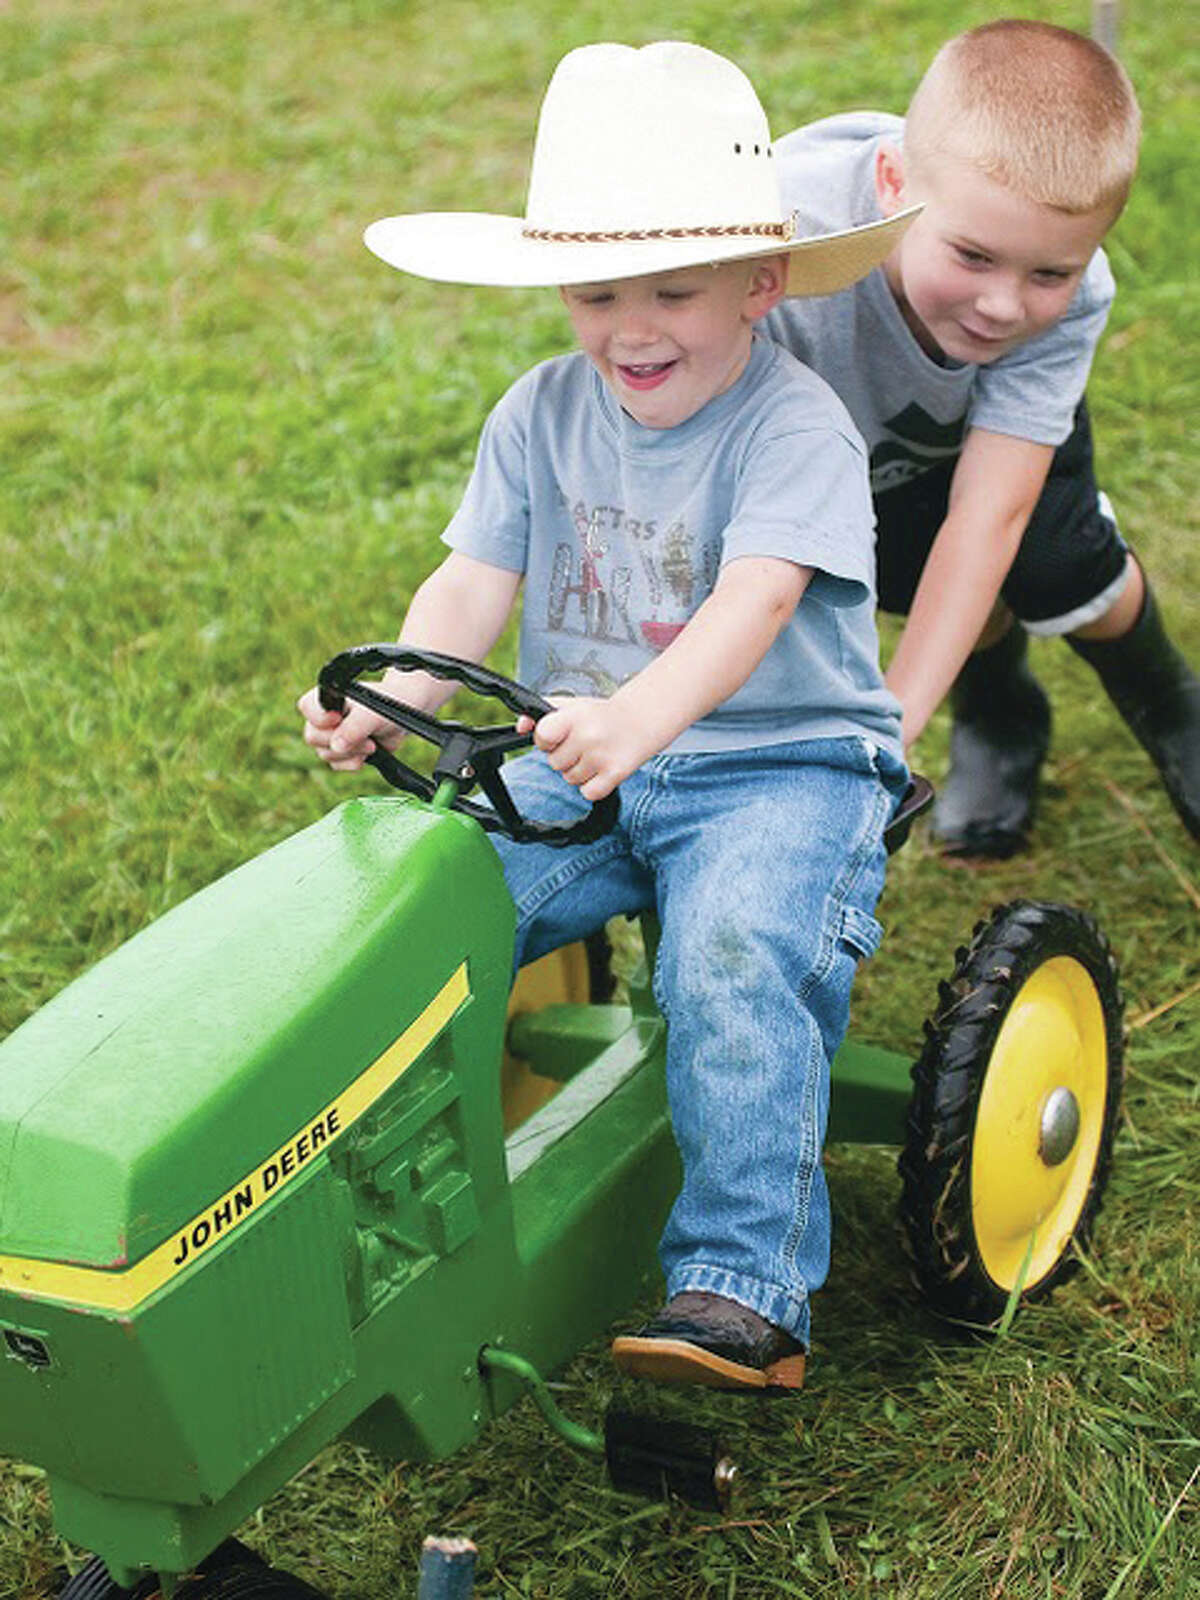 Joshua Cordes, 5, pushes his younger brother, James, on a miniature John Deere tractor Sunday at the silver anniversary of the Tri-County Antique Club’s Olden Days Festival in Dow.